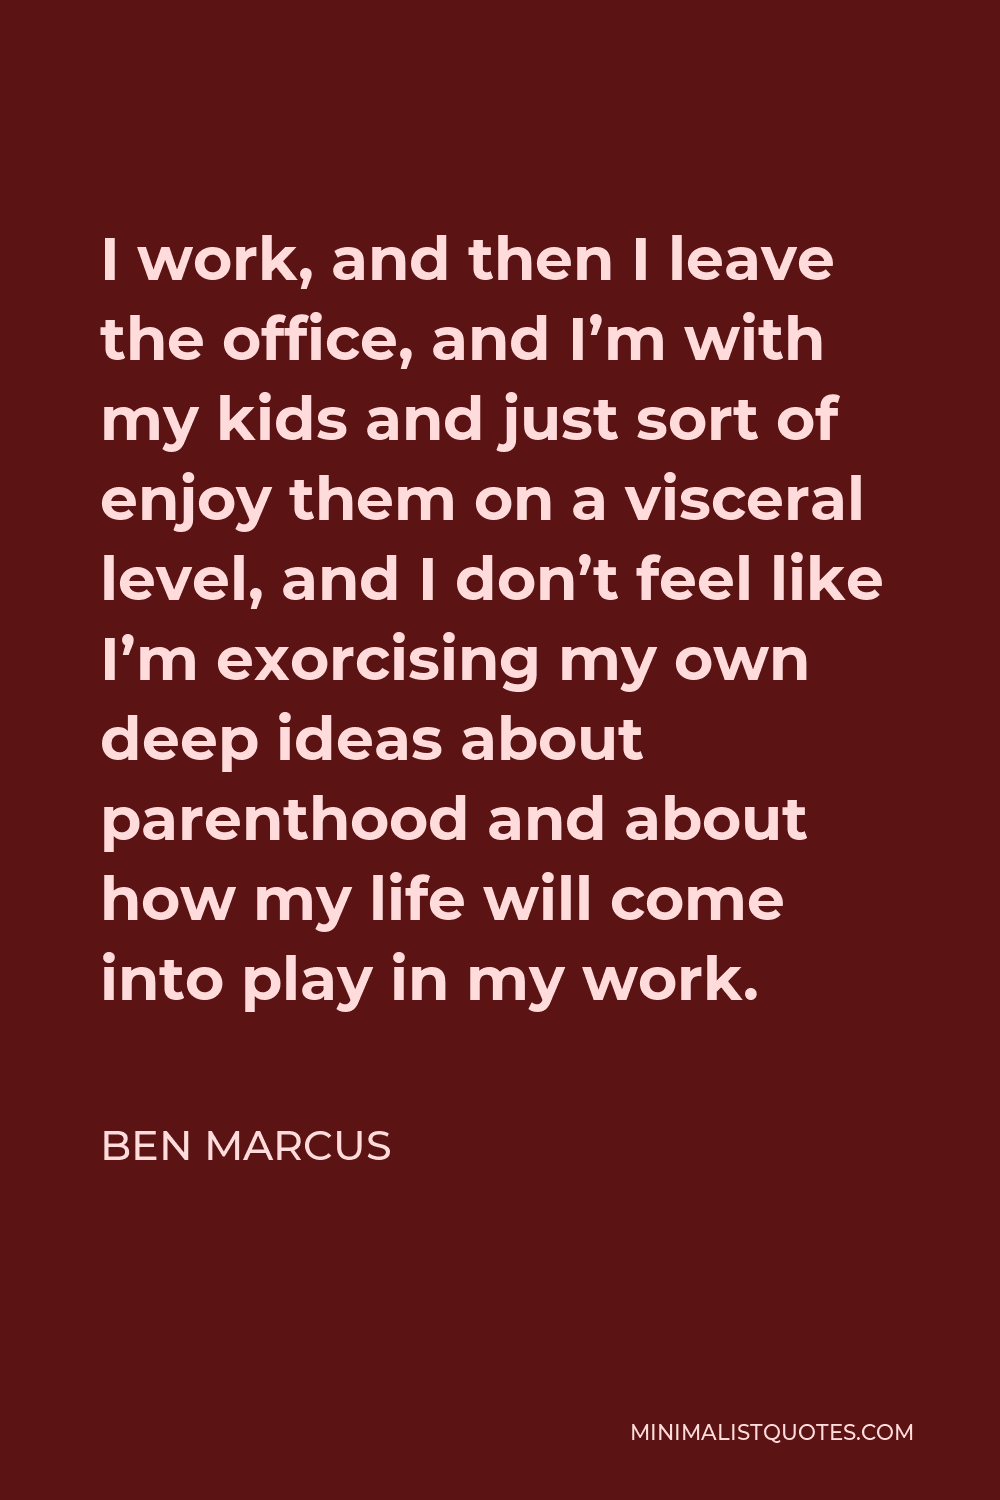 Ben Marcus Quote - I work, and then I leave the office, and I’m with my kids and just sort of enjoy them on a visceral level, and I don’t feel like I’m exorcising my own deep ideas about parenthood and about how my life will come into play in my work.